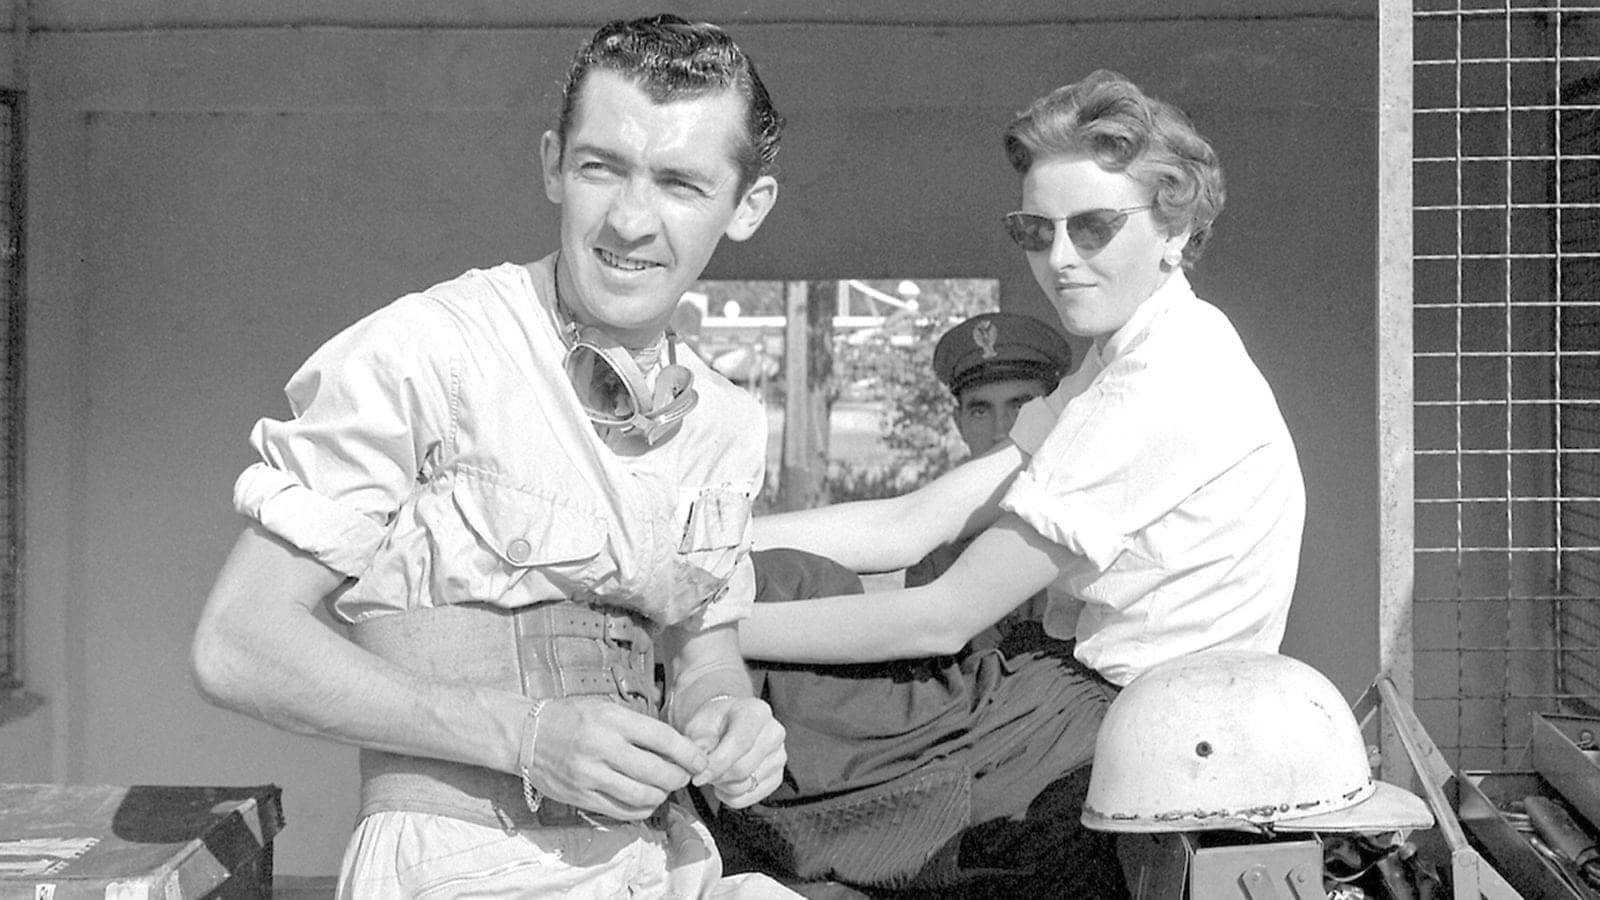 Stuart Lewis-Evans with a girlfriend in the pits at Monza ahead of the 1958 Italian Grand Prix